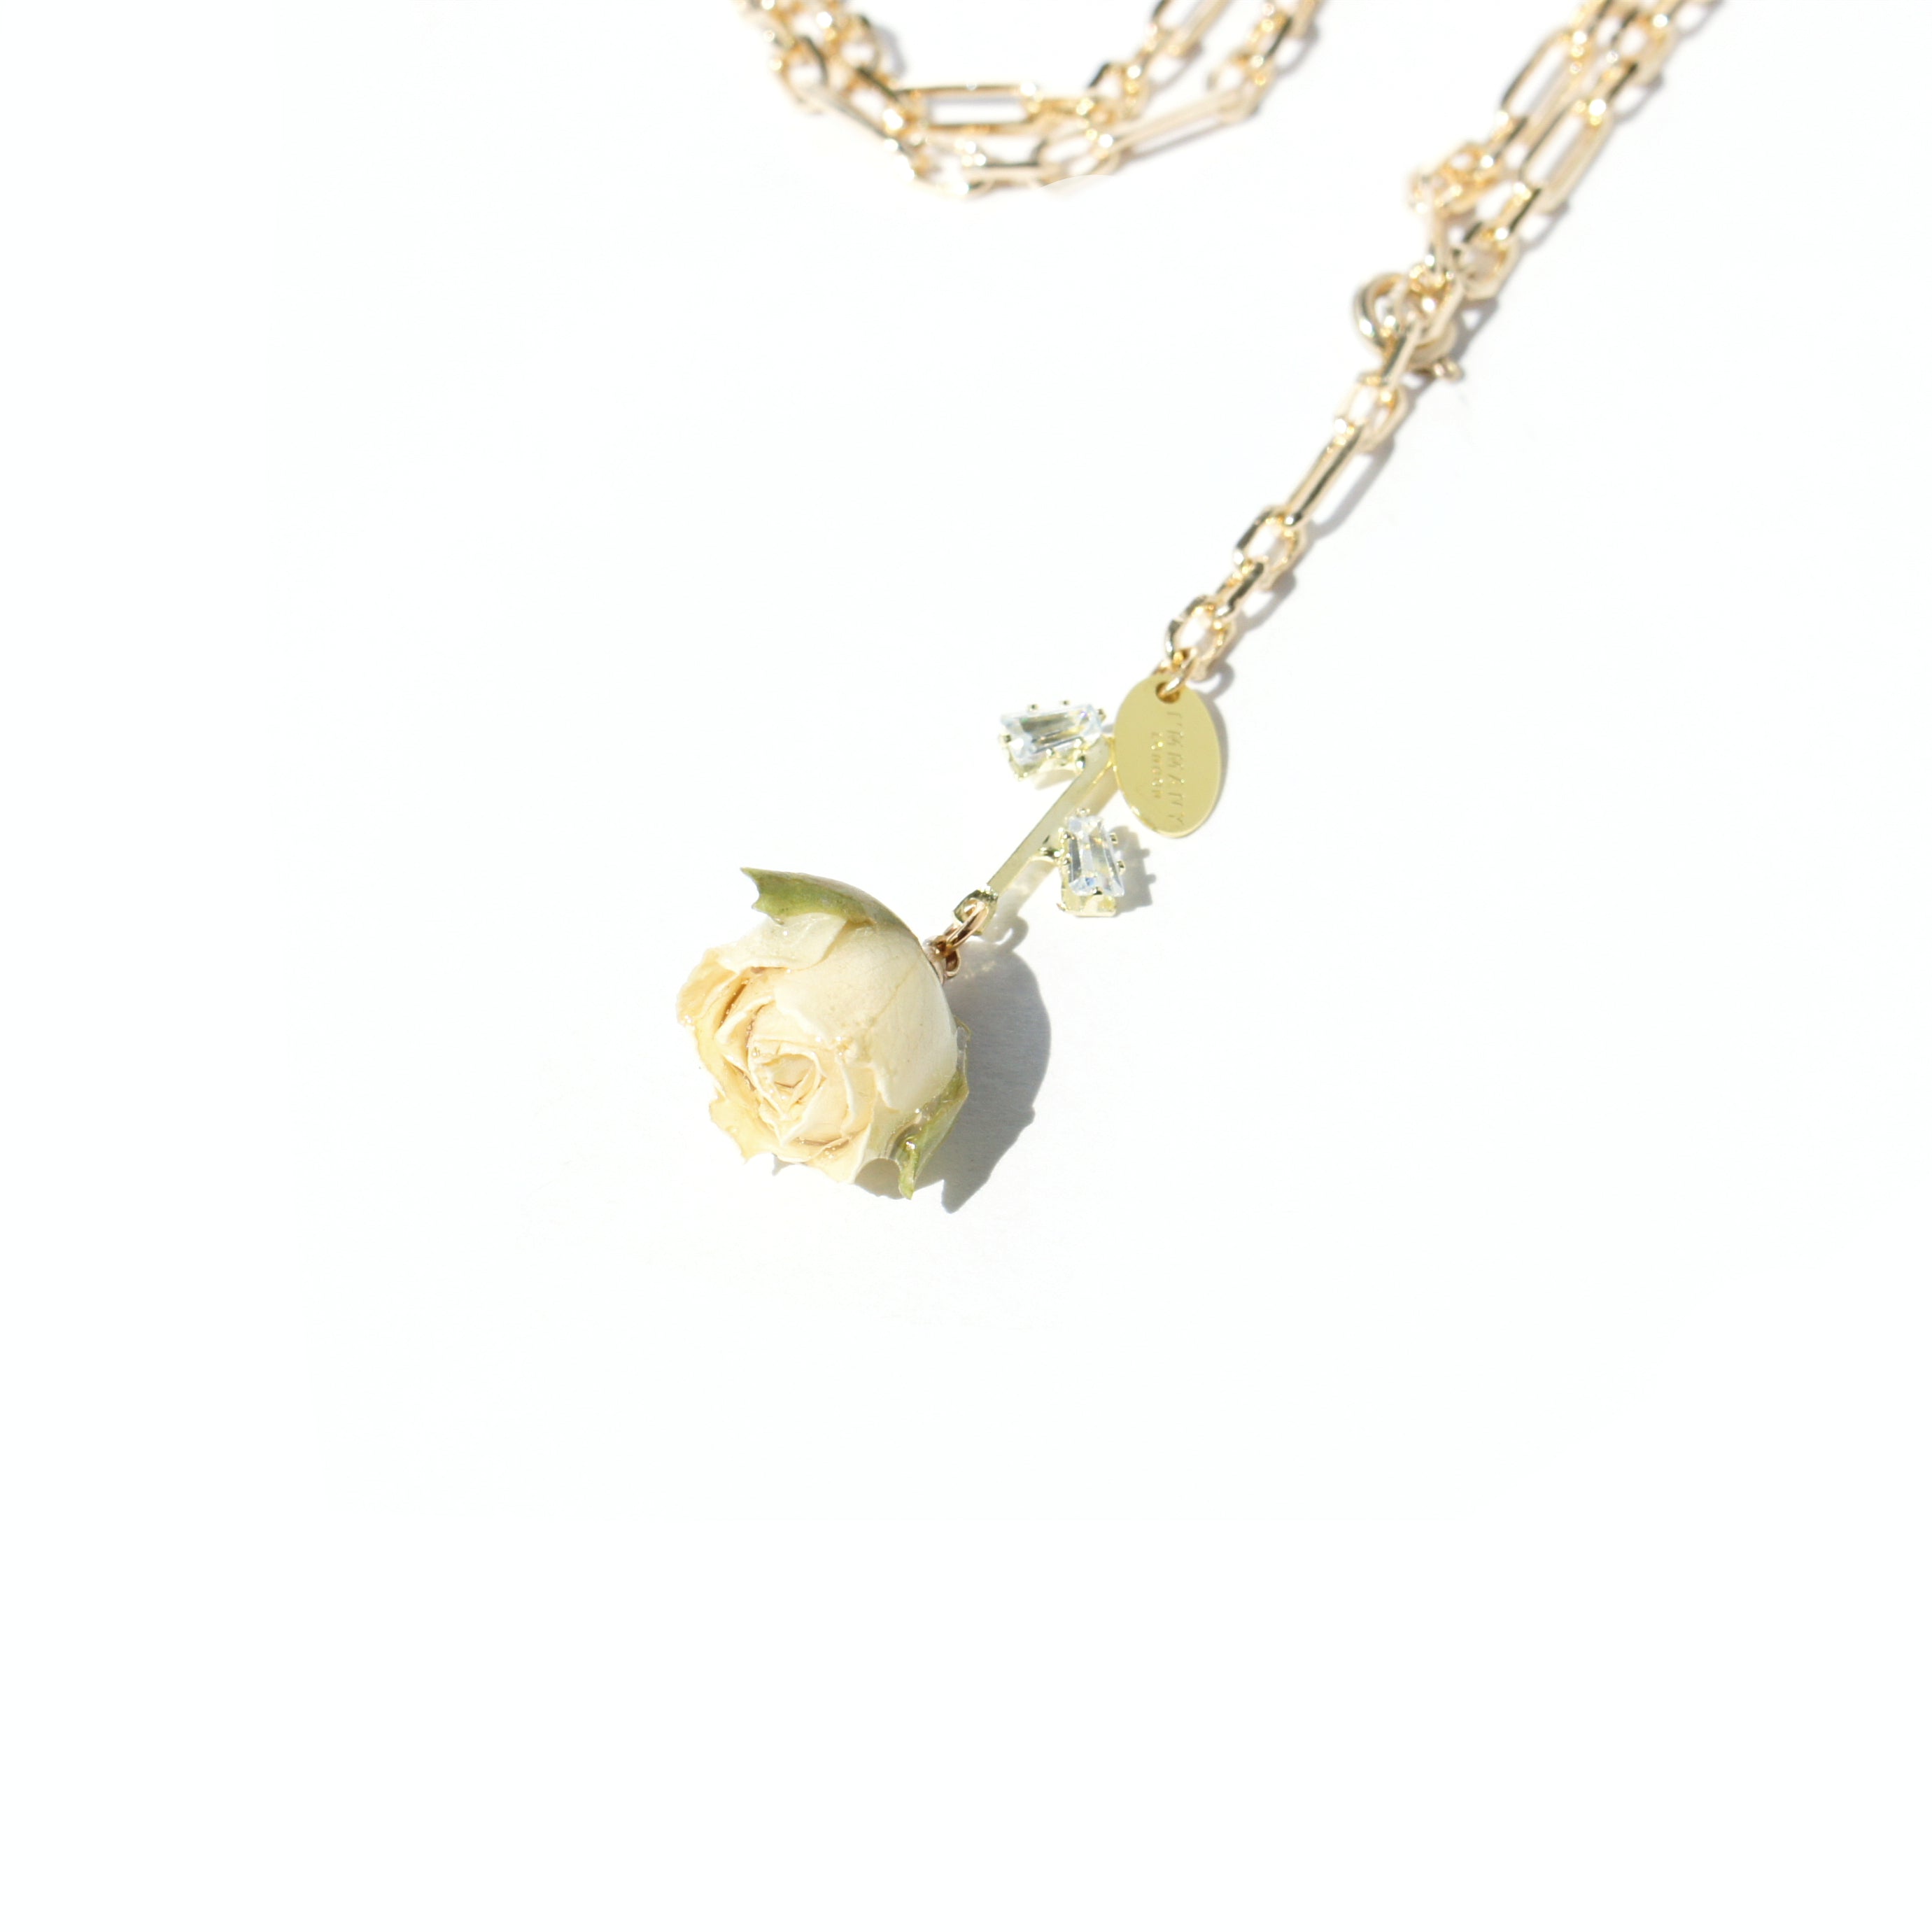 *REAL FLOWER* Rosa Blanca Adjustable Chain Necklace with Rosebud Pendant